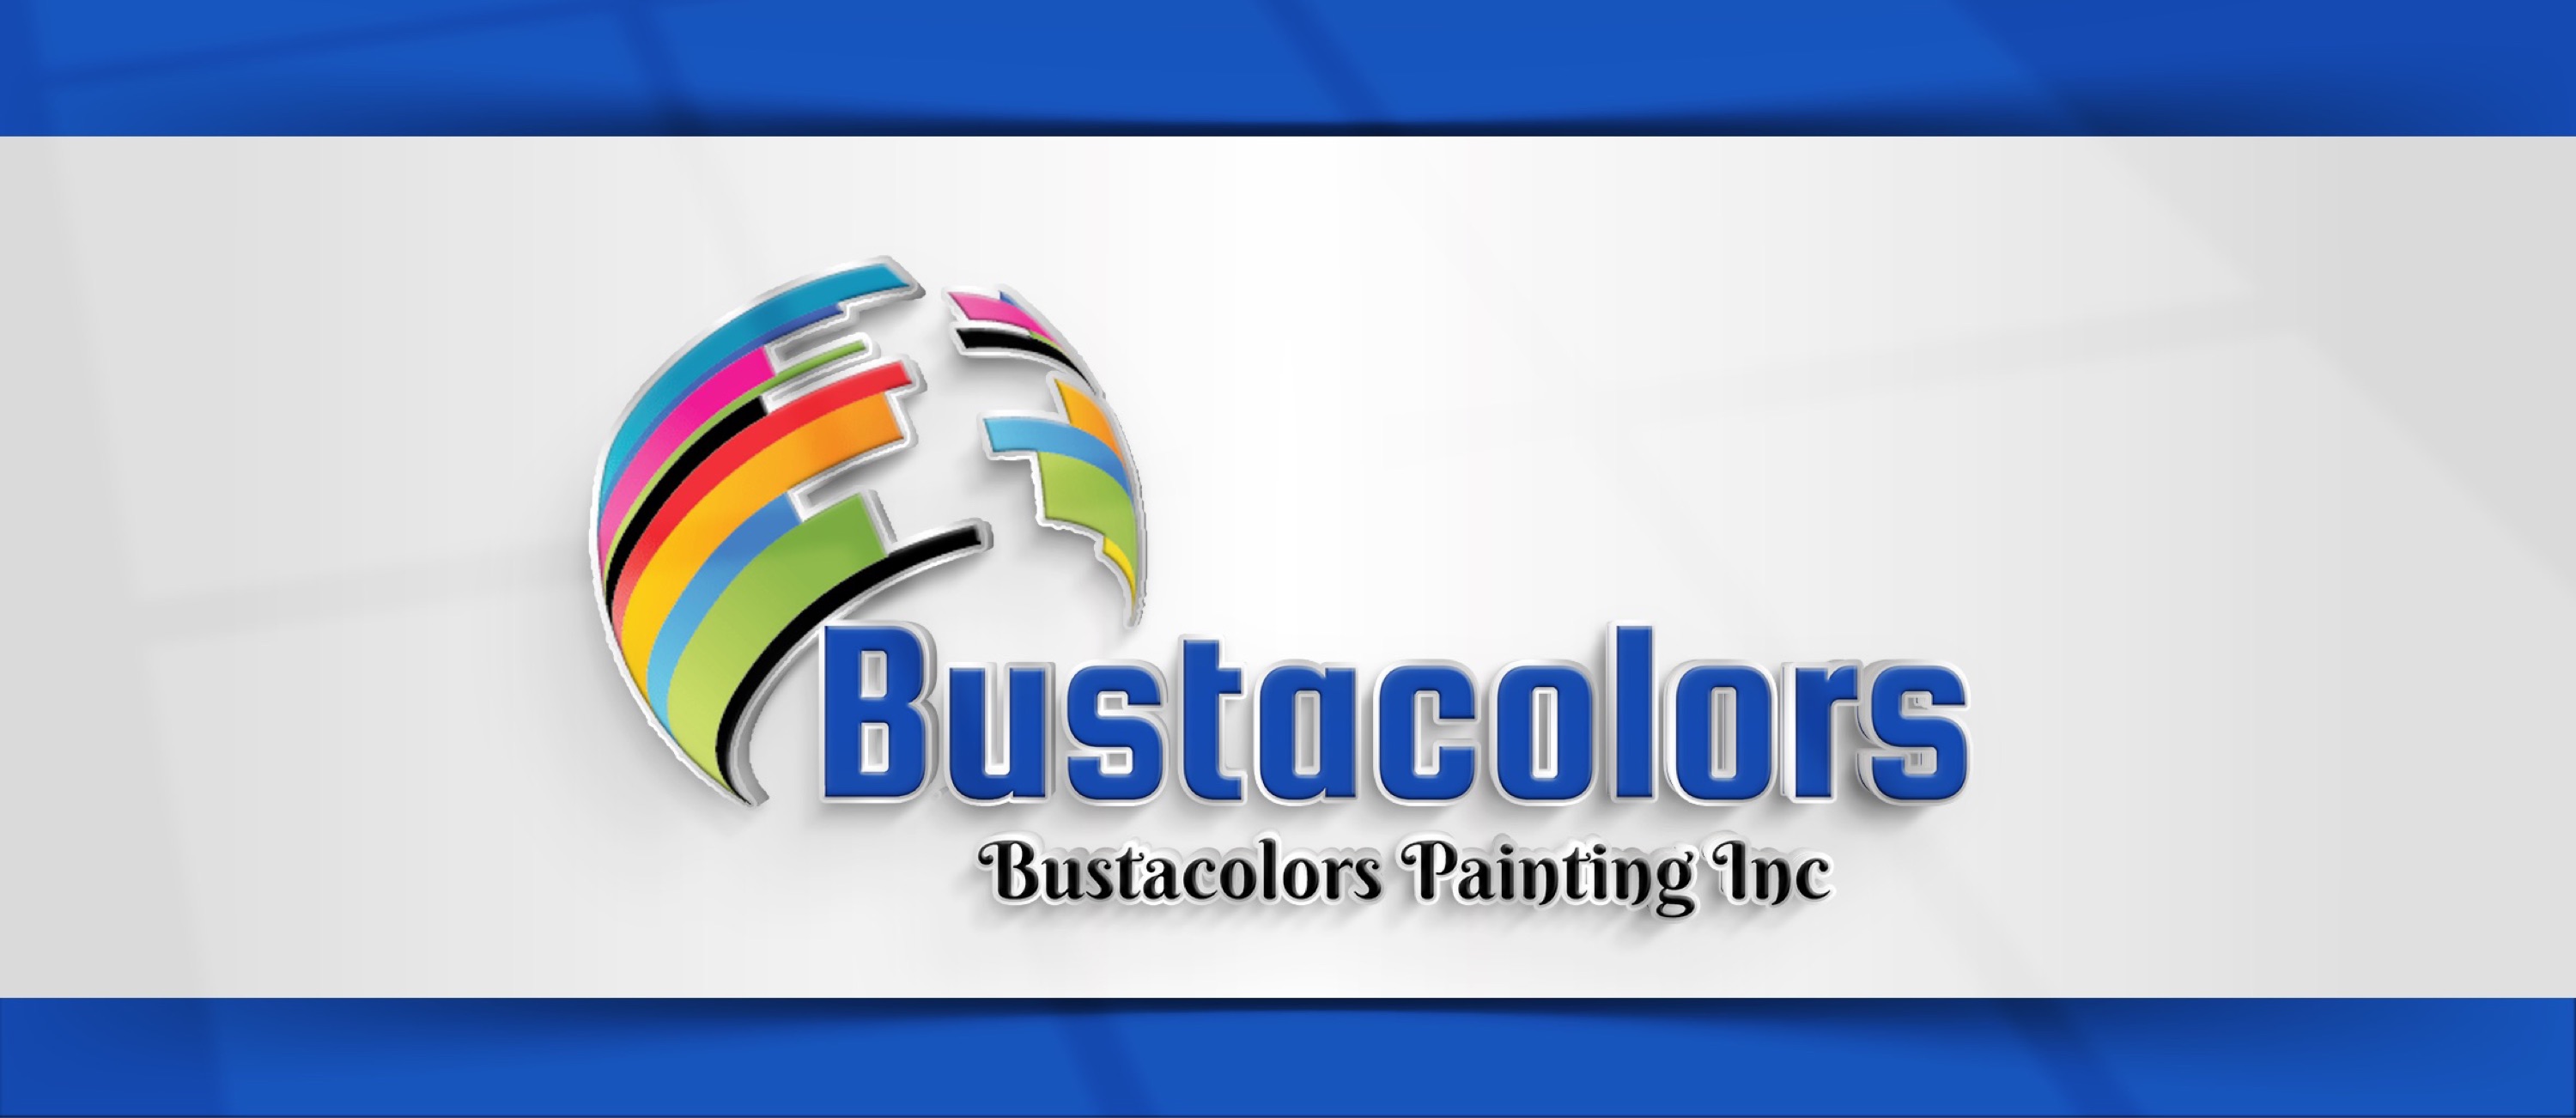 Bustacolors Painting, Inc. Logo